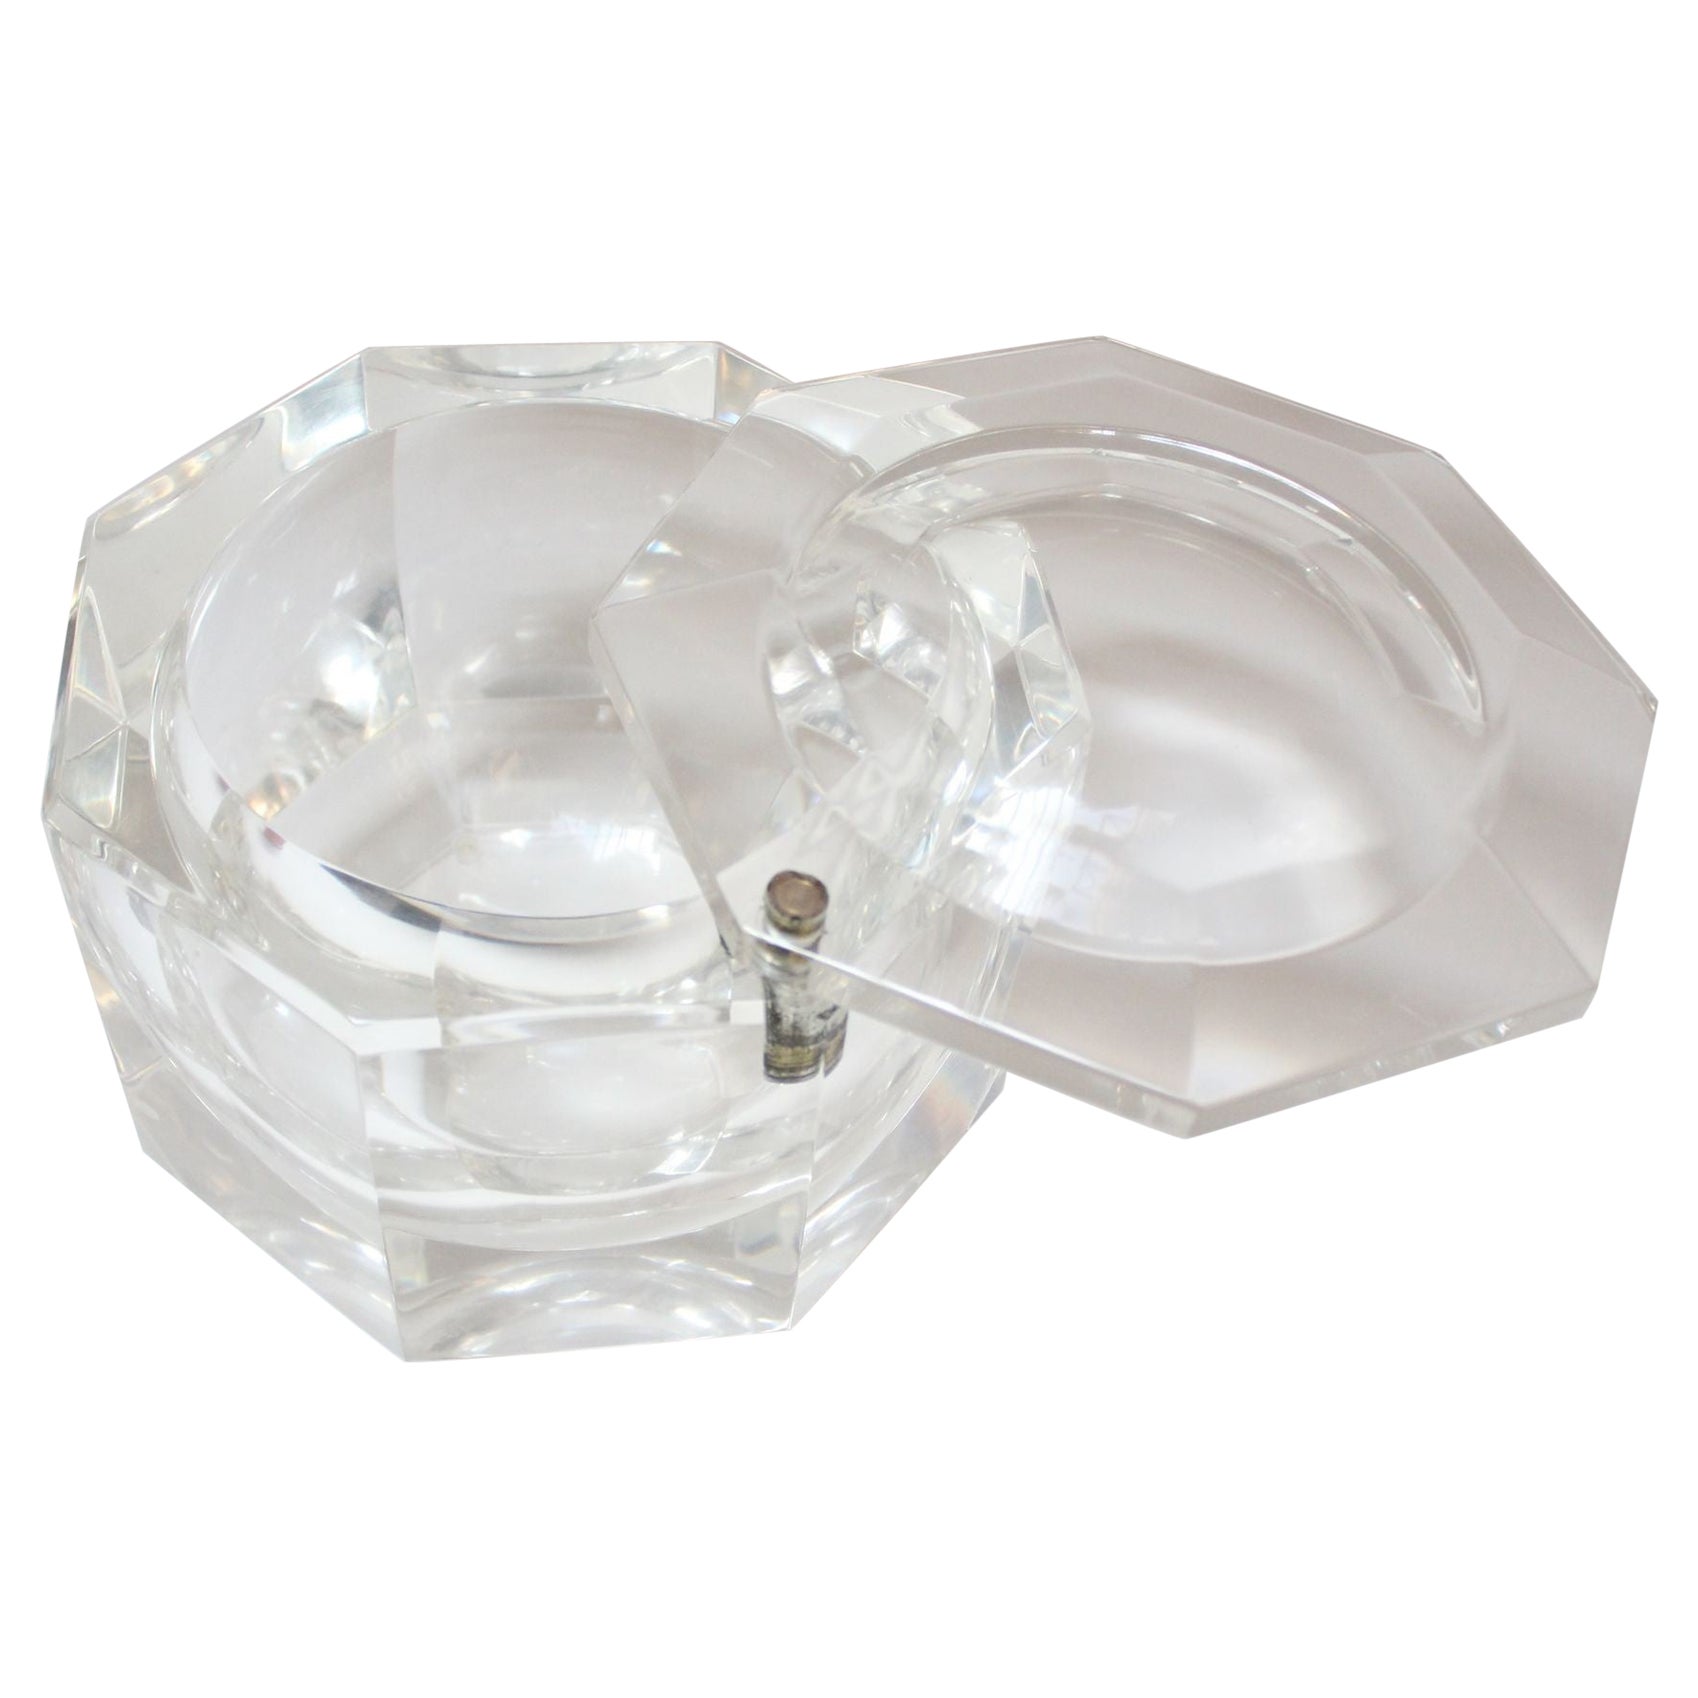 Italian Lucite Octagonal Form "Gem" Ice Bucket by Alessandro Albrizzi